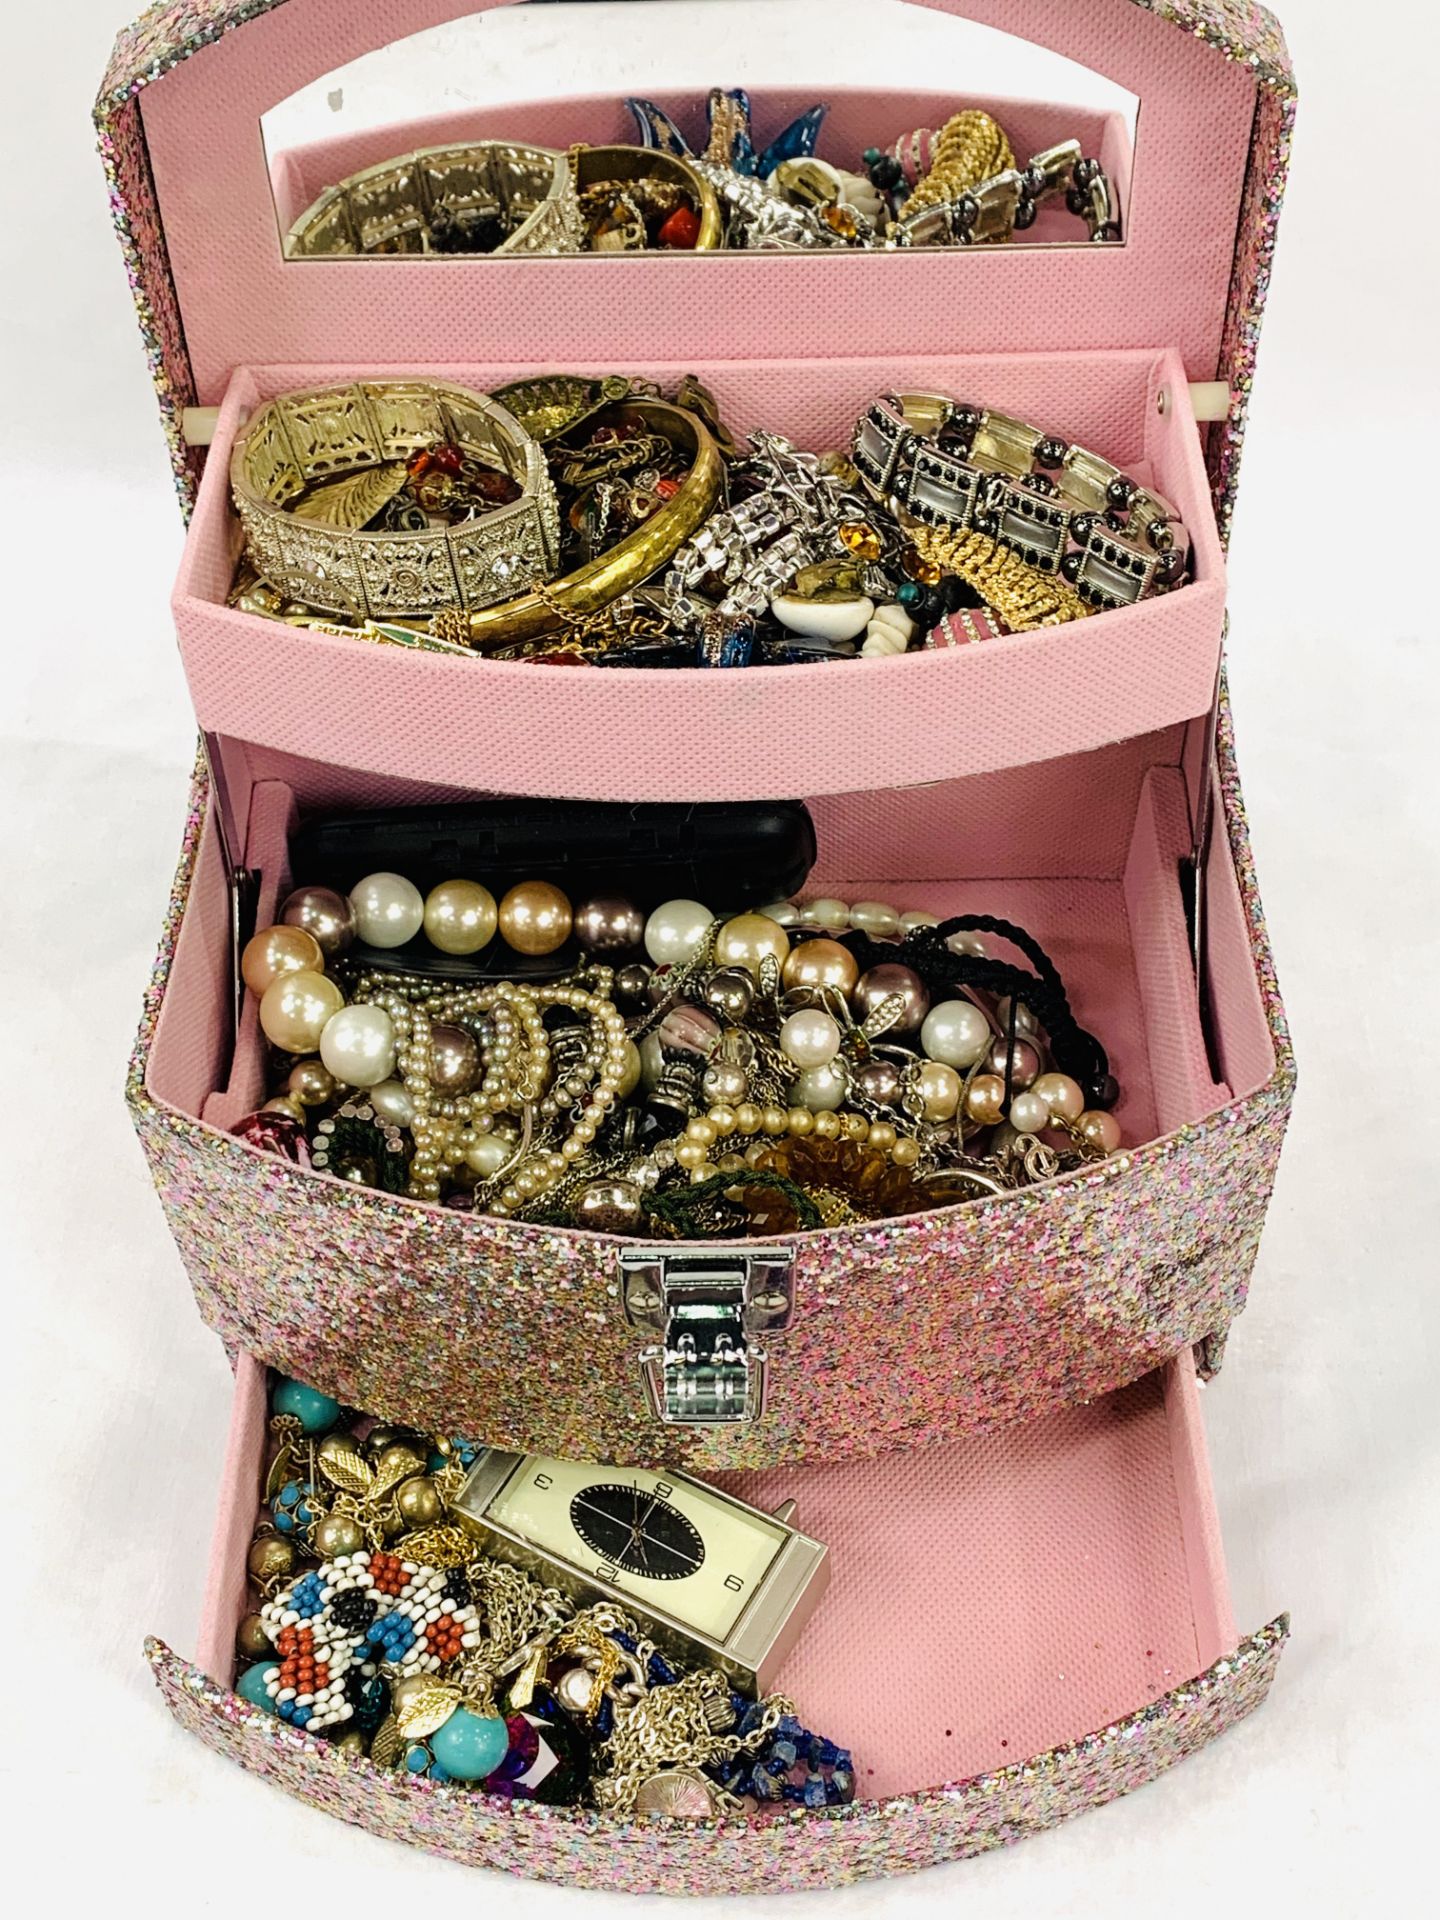 Jewellery box and contents.